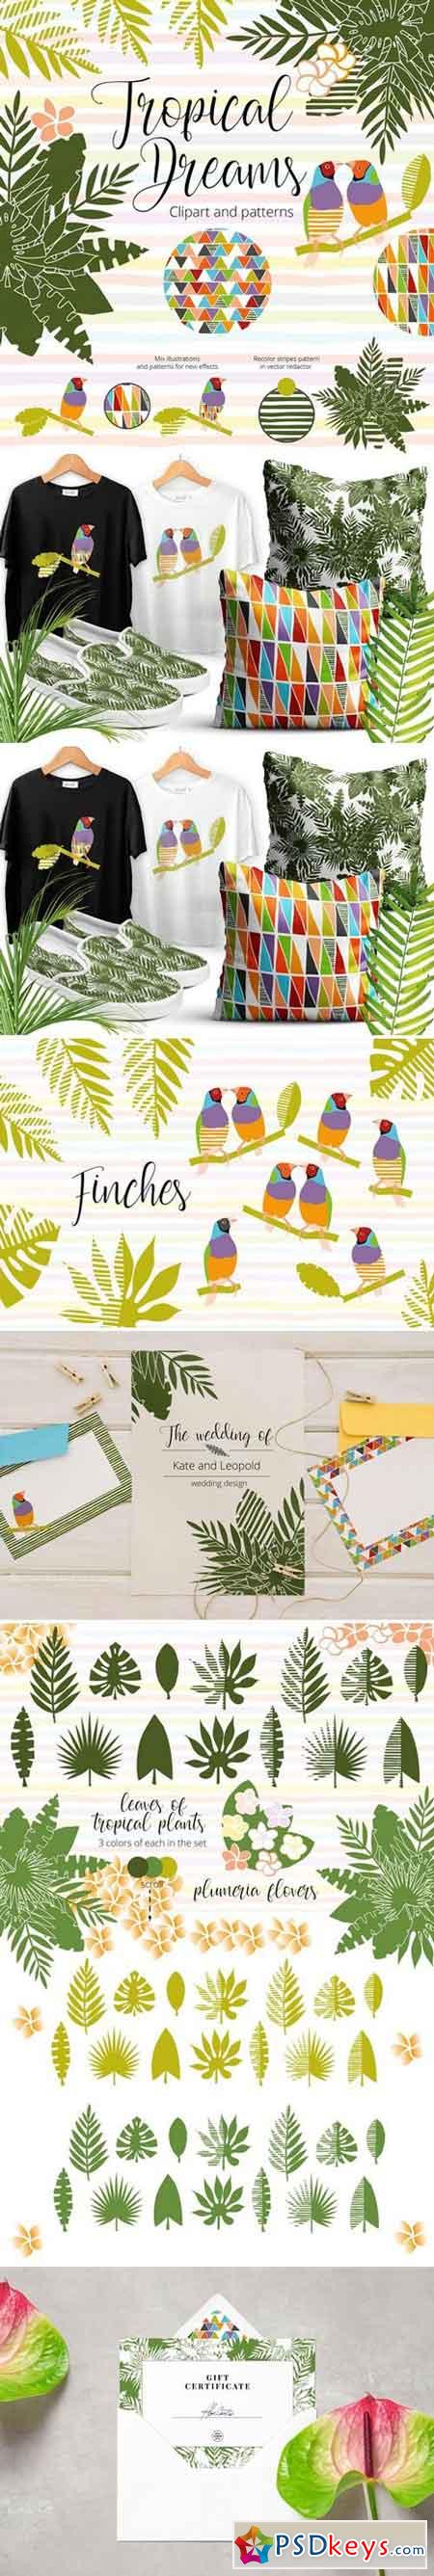 Tropical dreams.Clipart and patterns 2352330